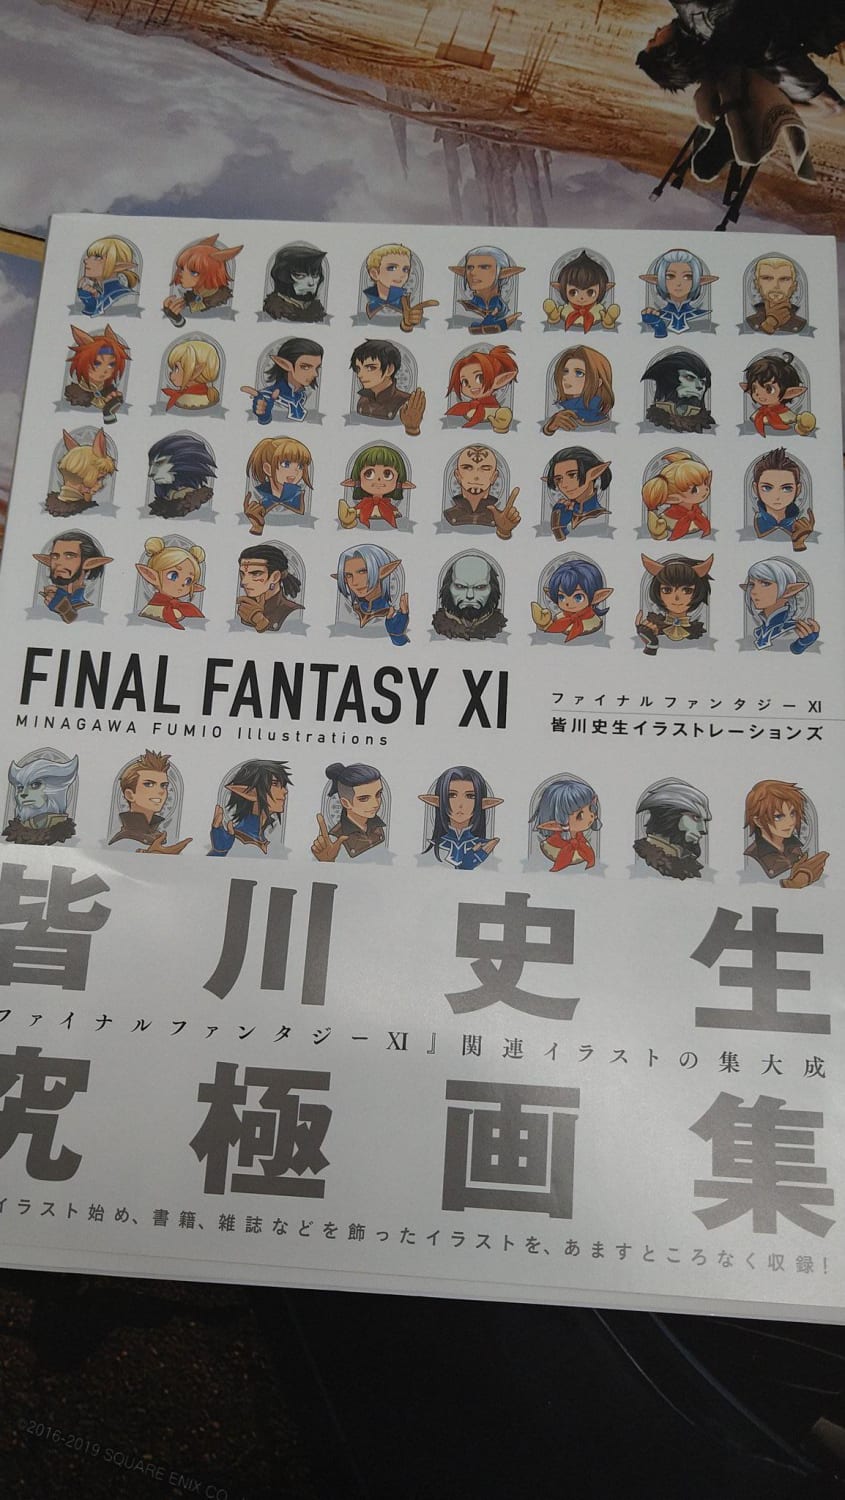 saw this on japanese twitter and am not familiar with both FFXI and Japanese, do you guys know who that character is on the last row right-most?